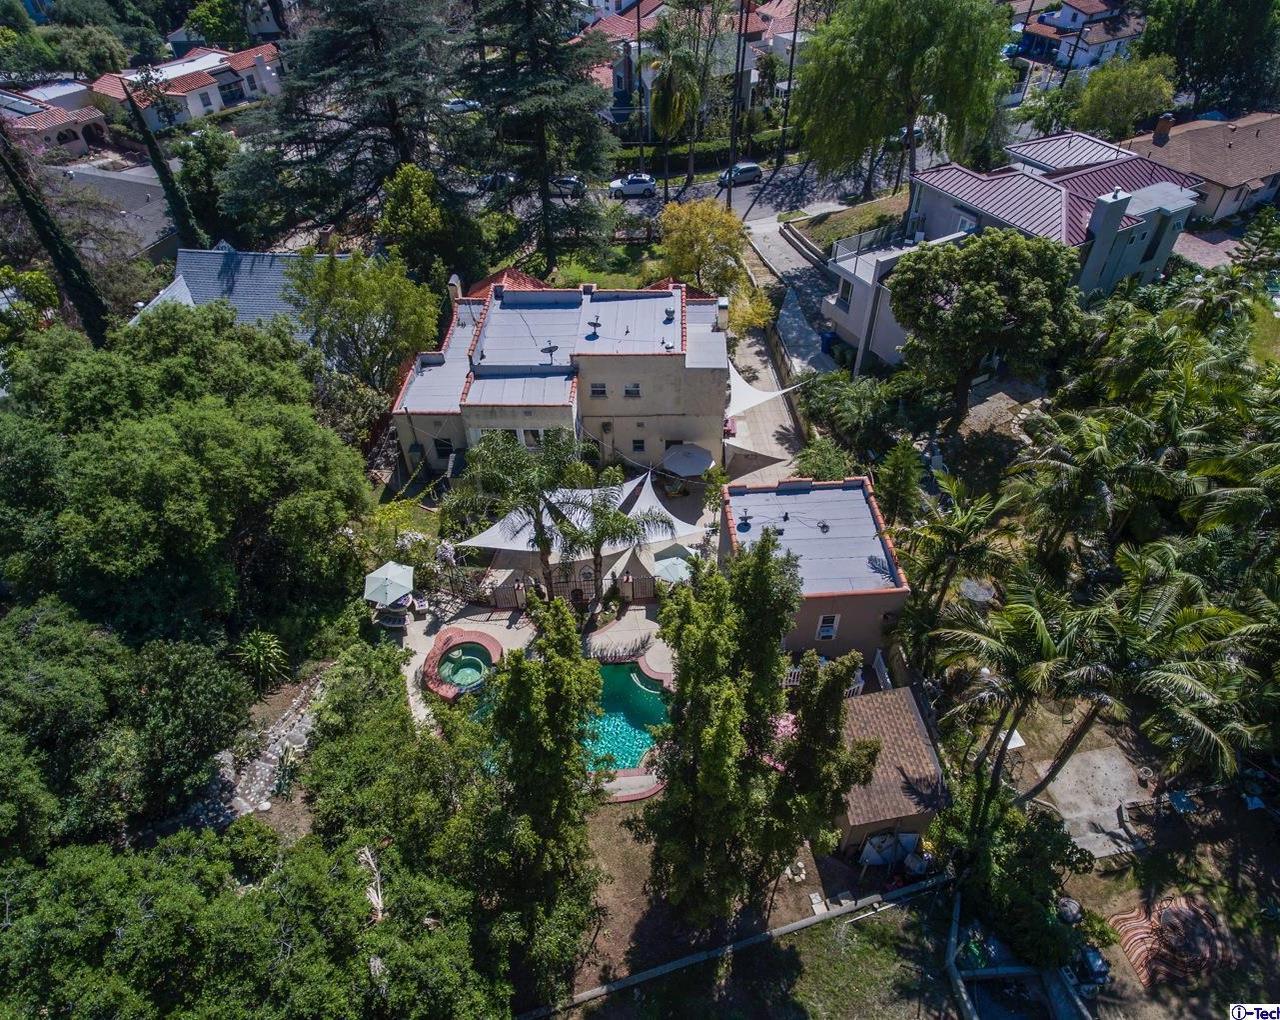 Spanish Stunner on Large Lot with Pool and Detached Guest | Eagle Rock Realtor | Eagle Rock House For Sale